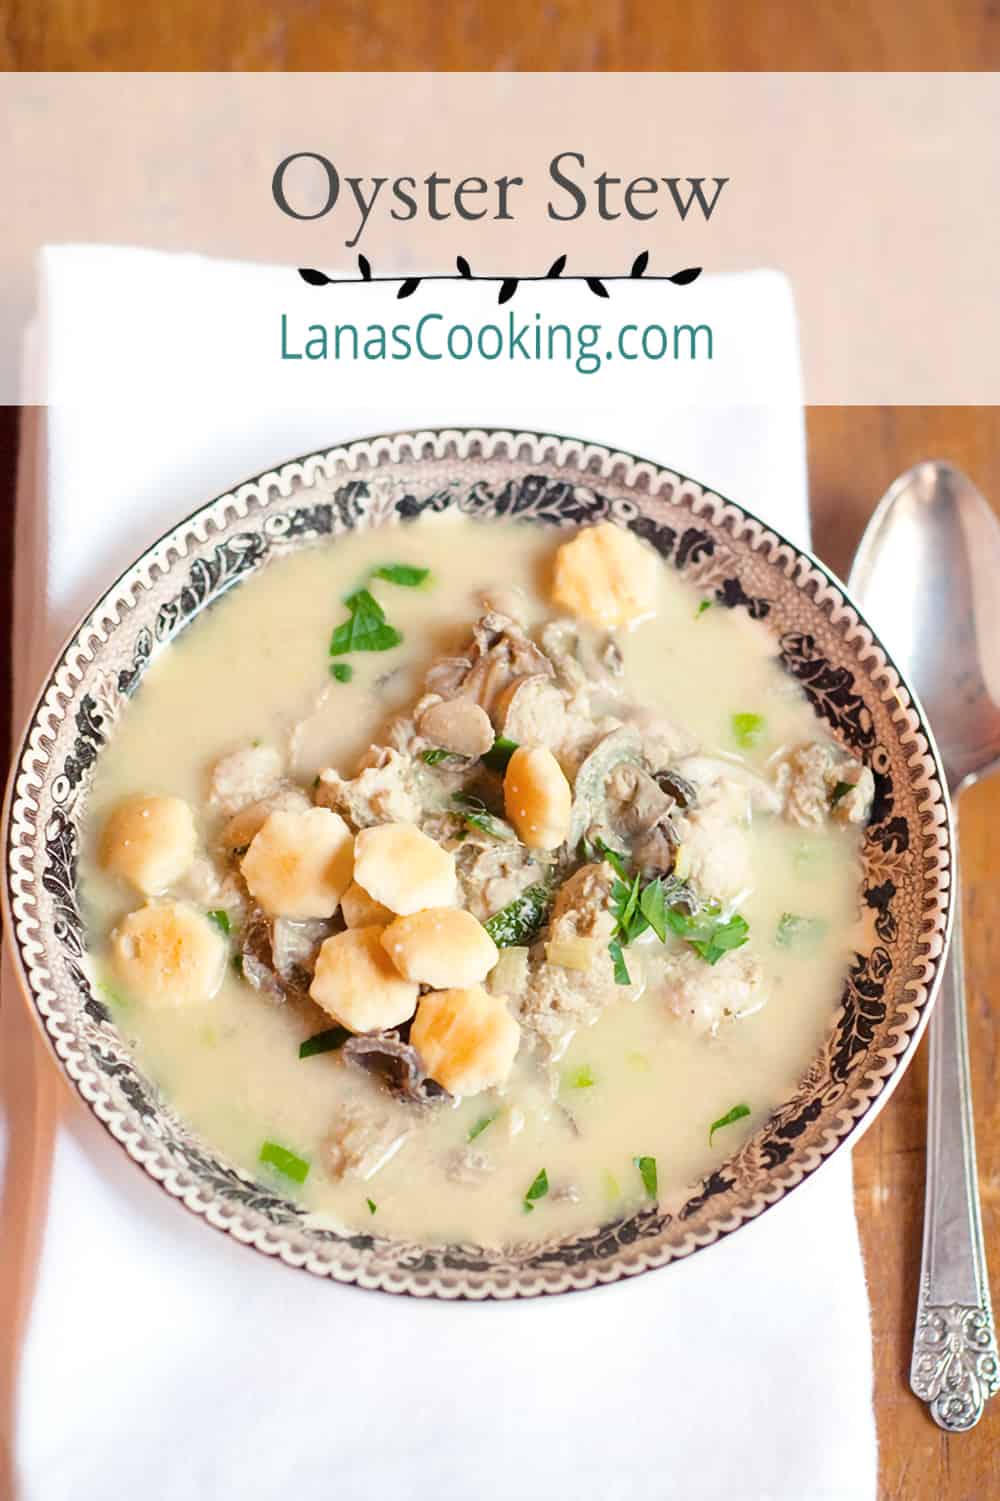 Southern Oyster Stew Recipe Lana s Cooking